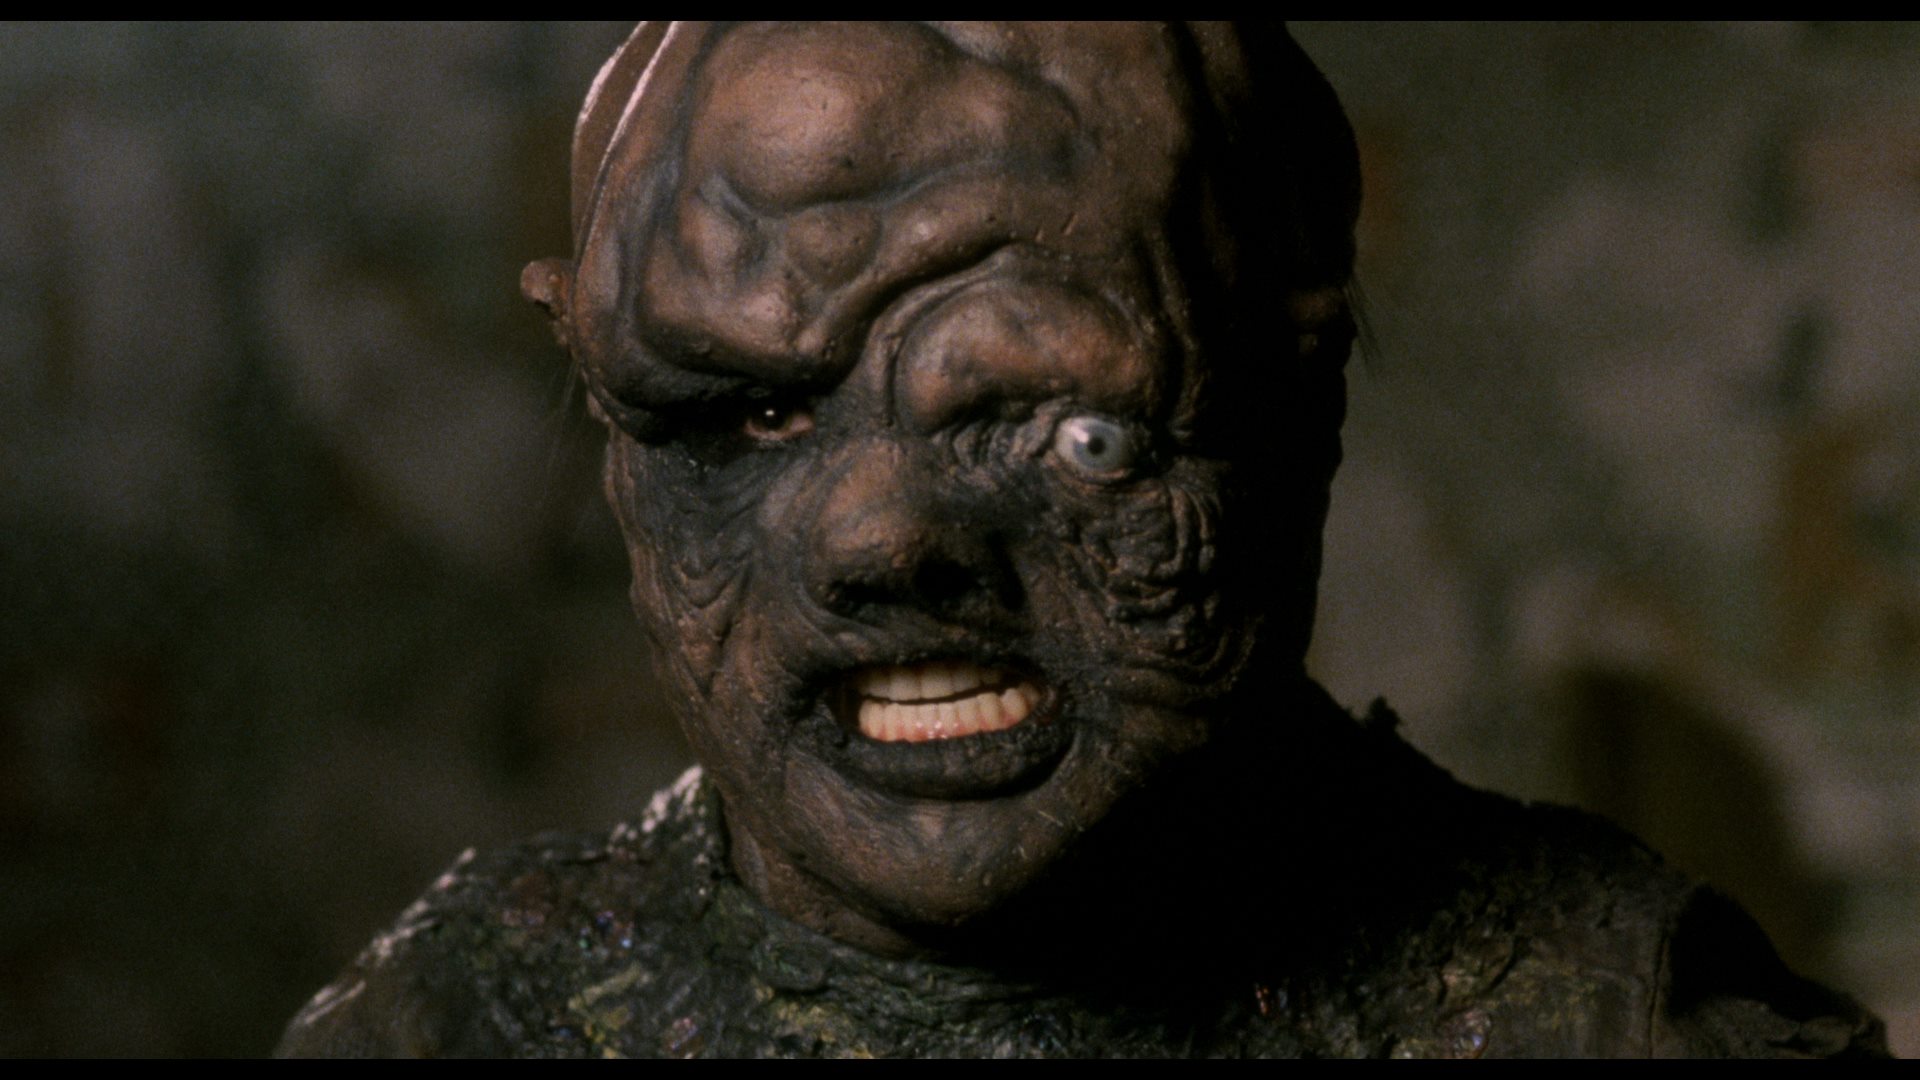 Who Will Direct The Toxic Avenger Reboot?